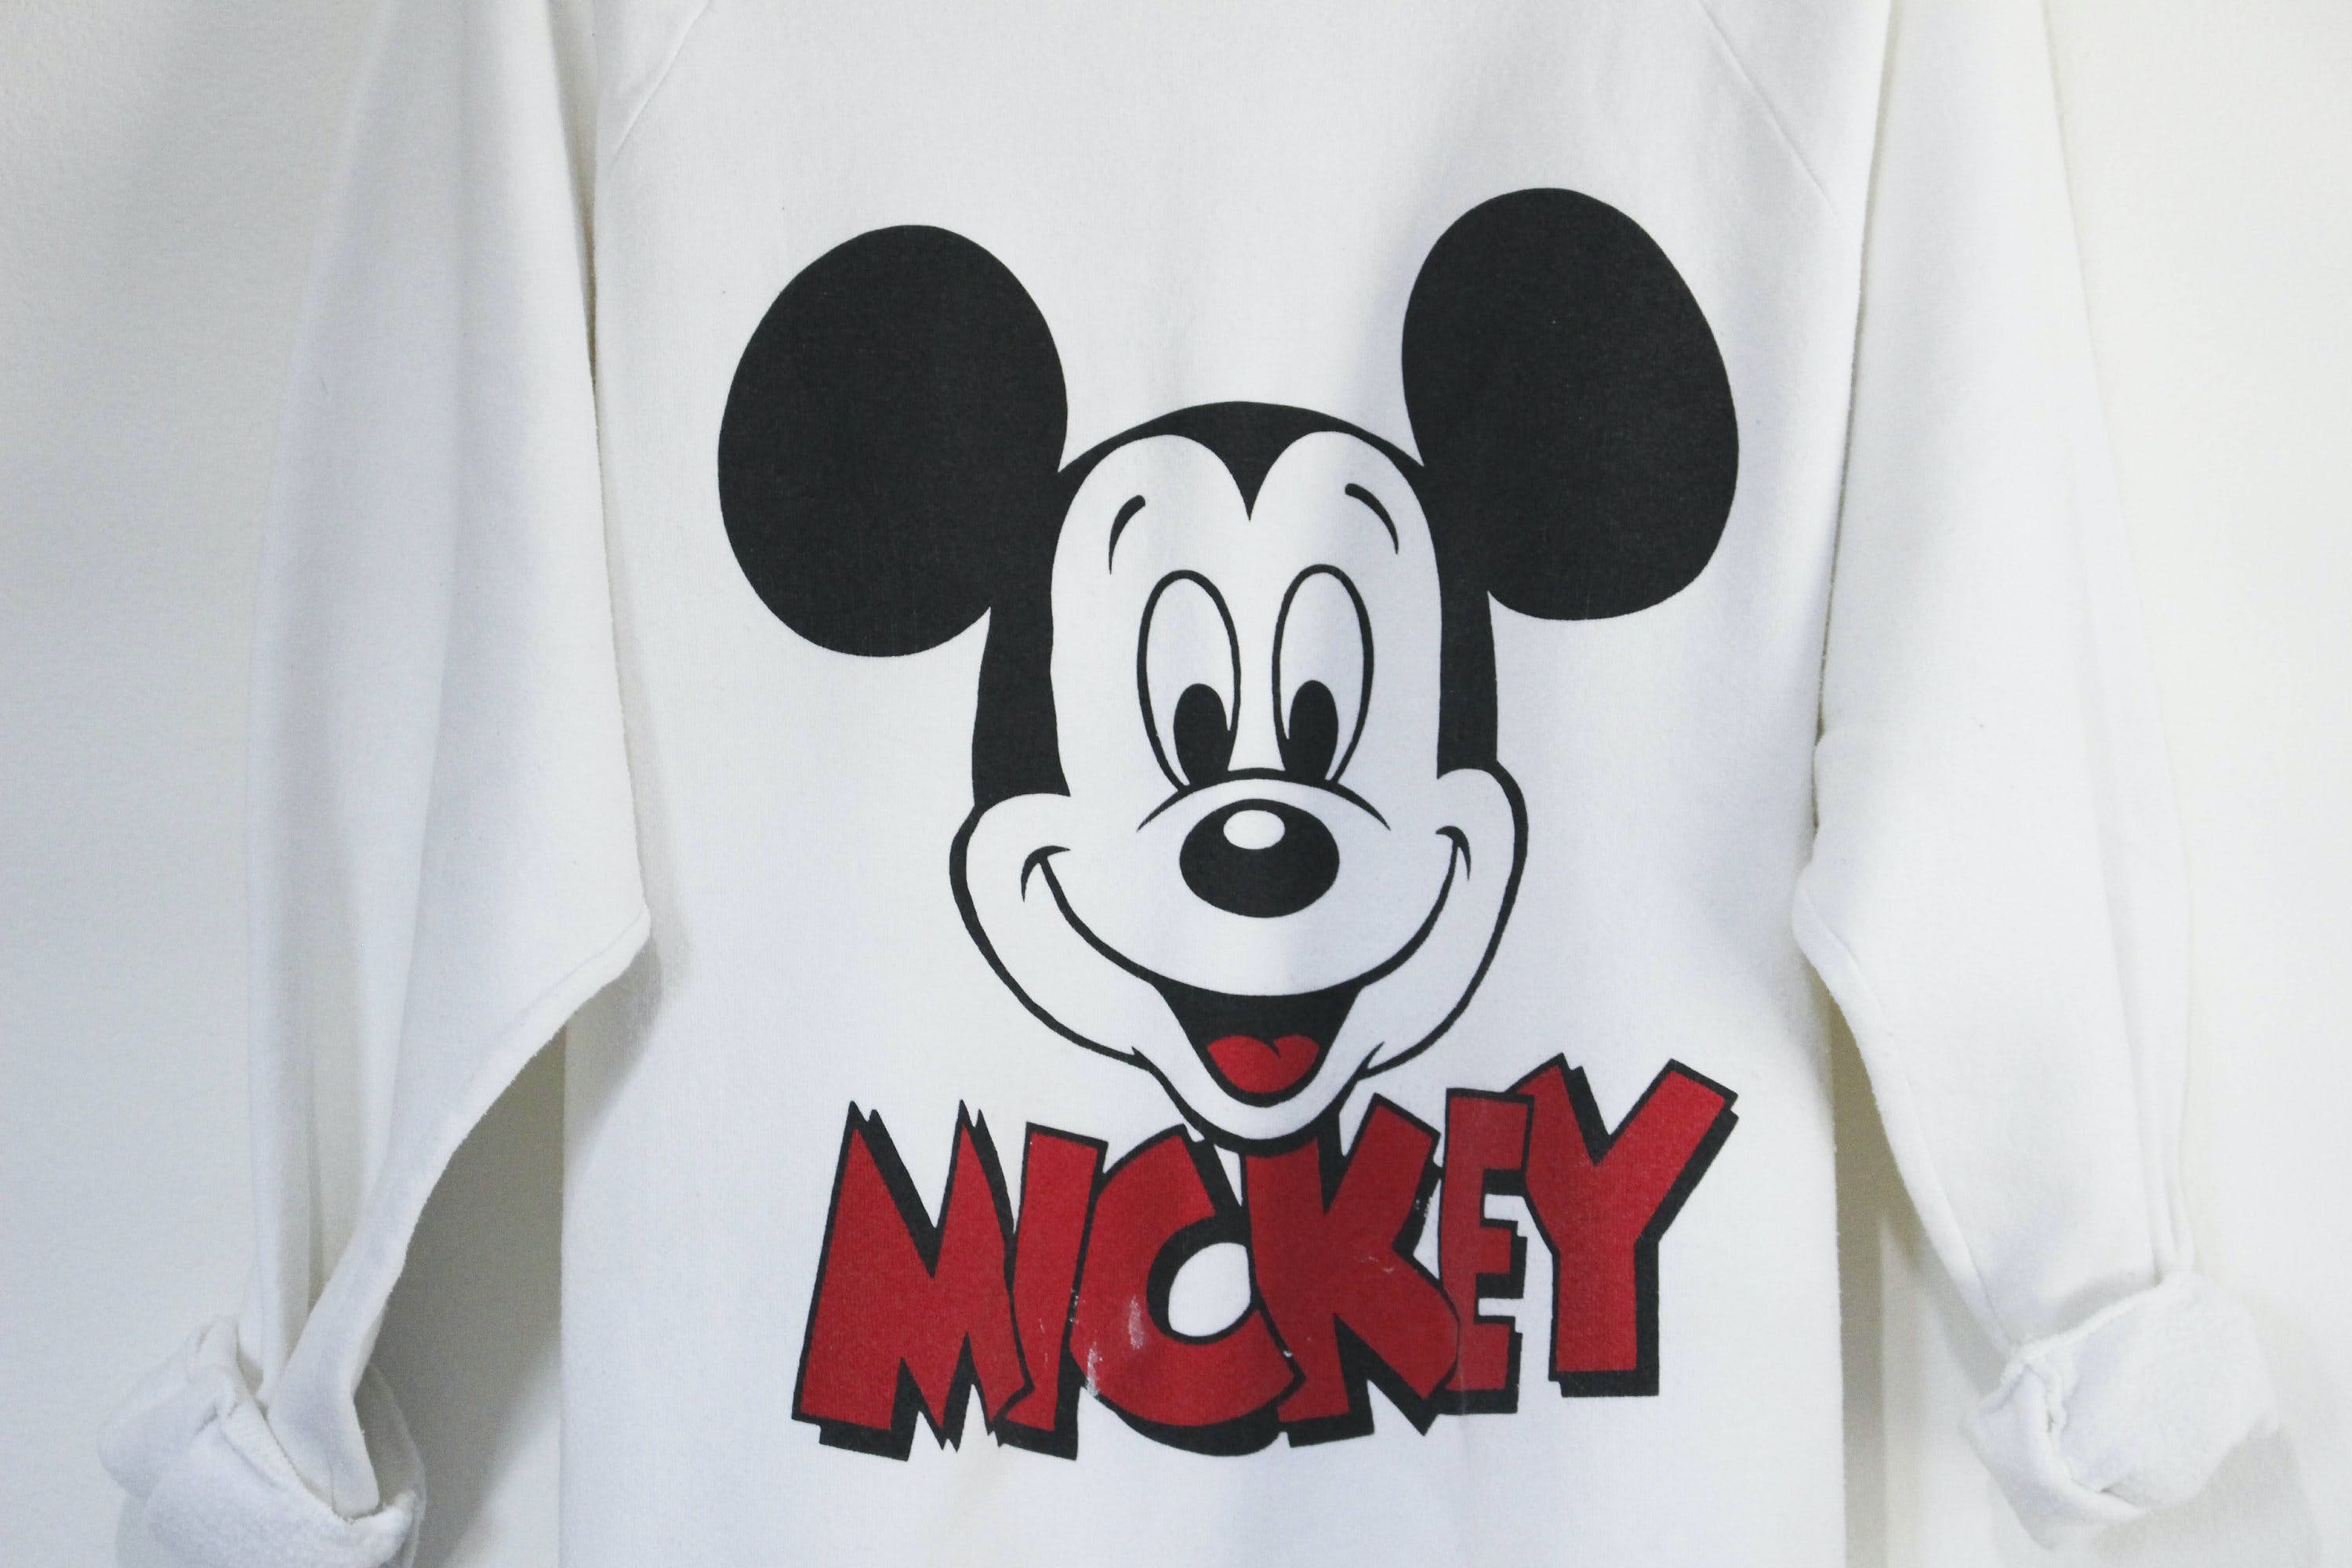 Vintage White Sweatshirt with Mickey Mouse Printed by Disney Character ...